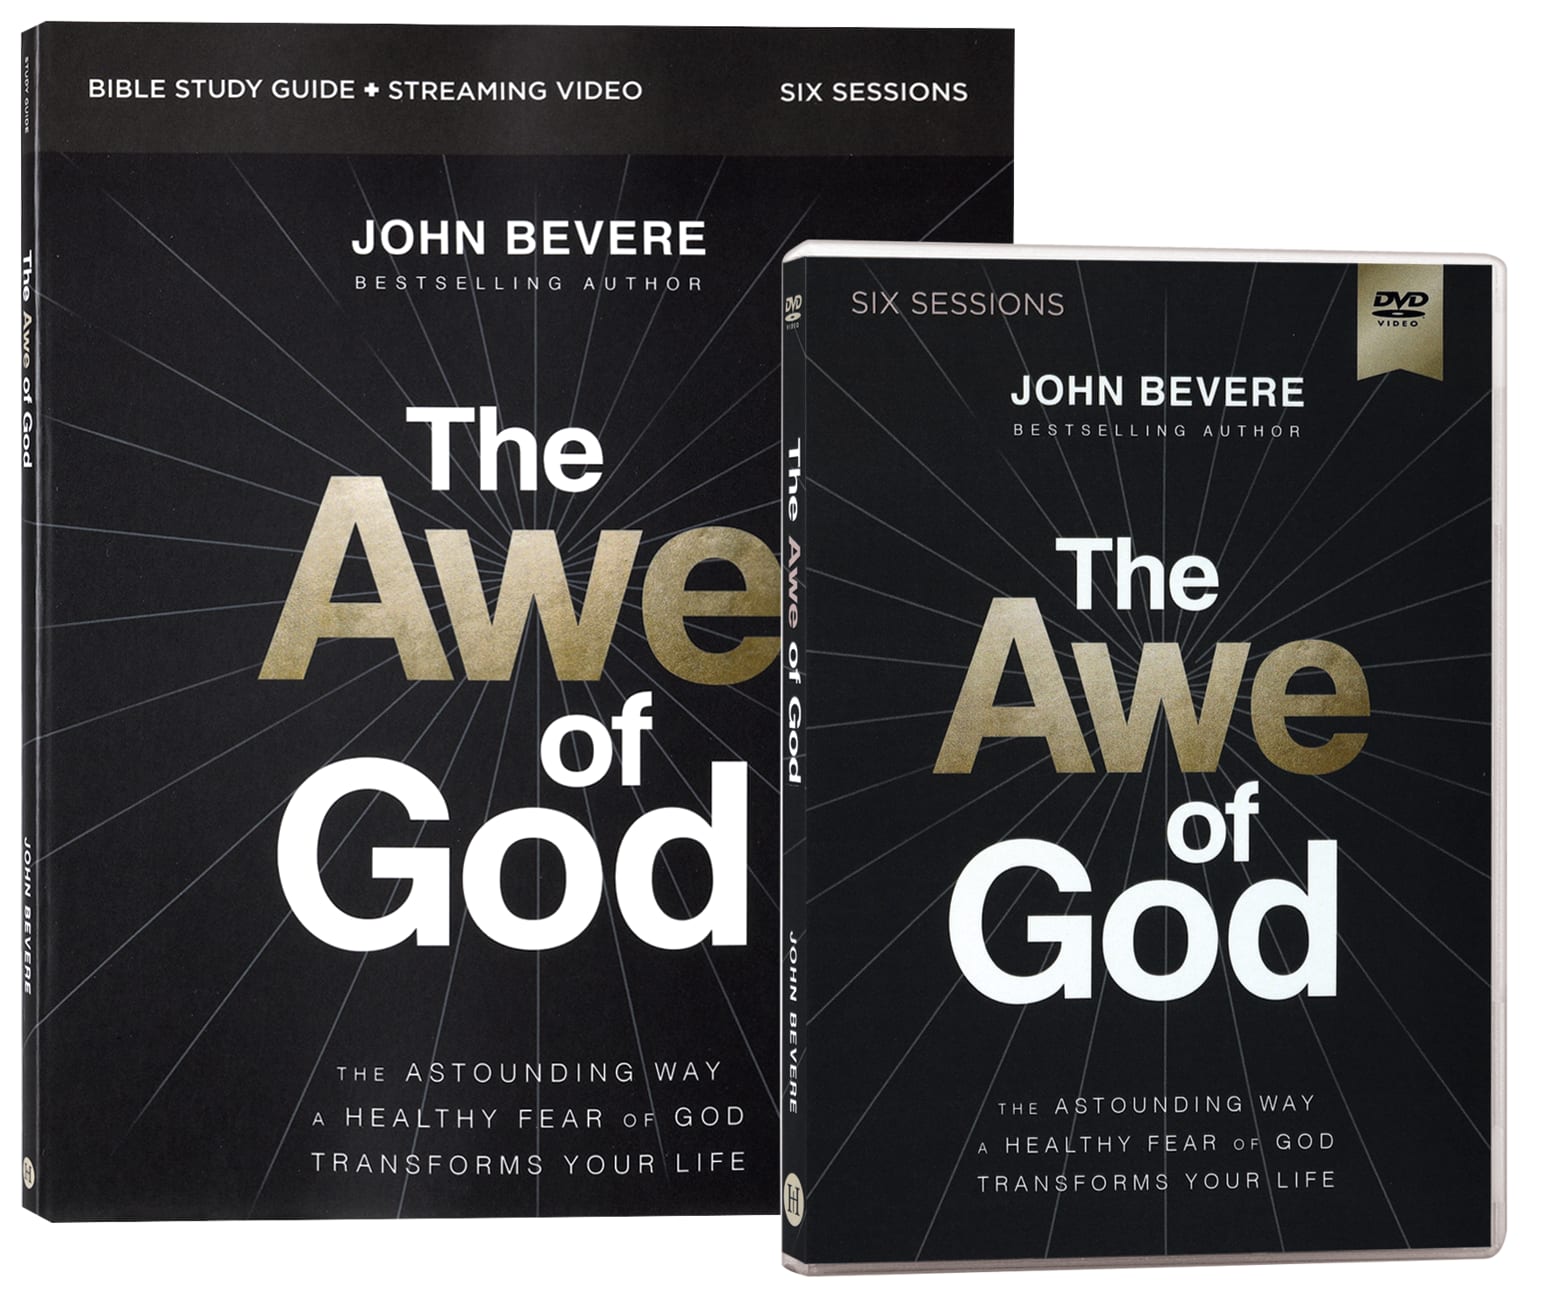 The Awe of God: The Astounding Way a Healthy Fear of God Transforms Your Life (Study Guide With Dvd) Pack/Kit